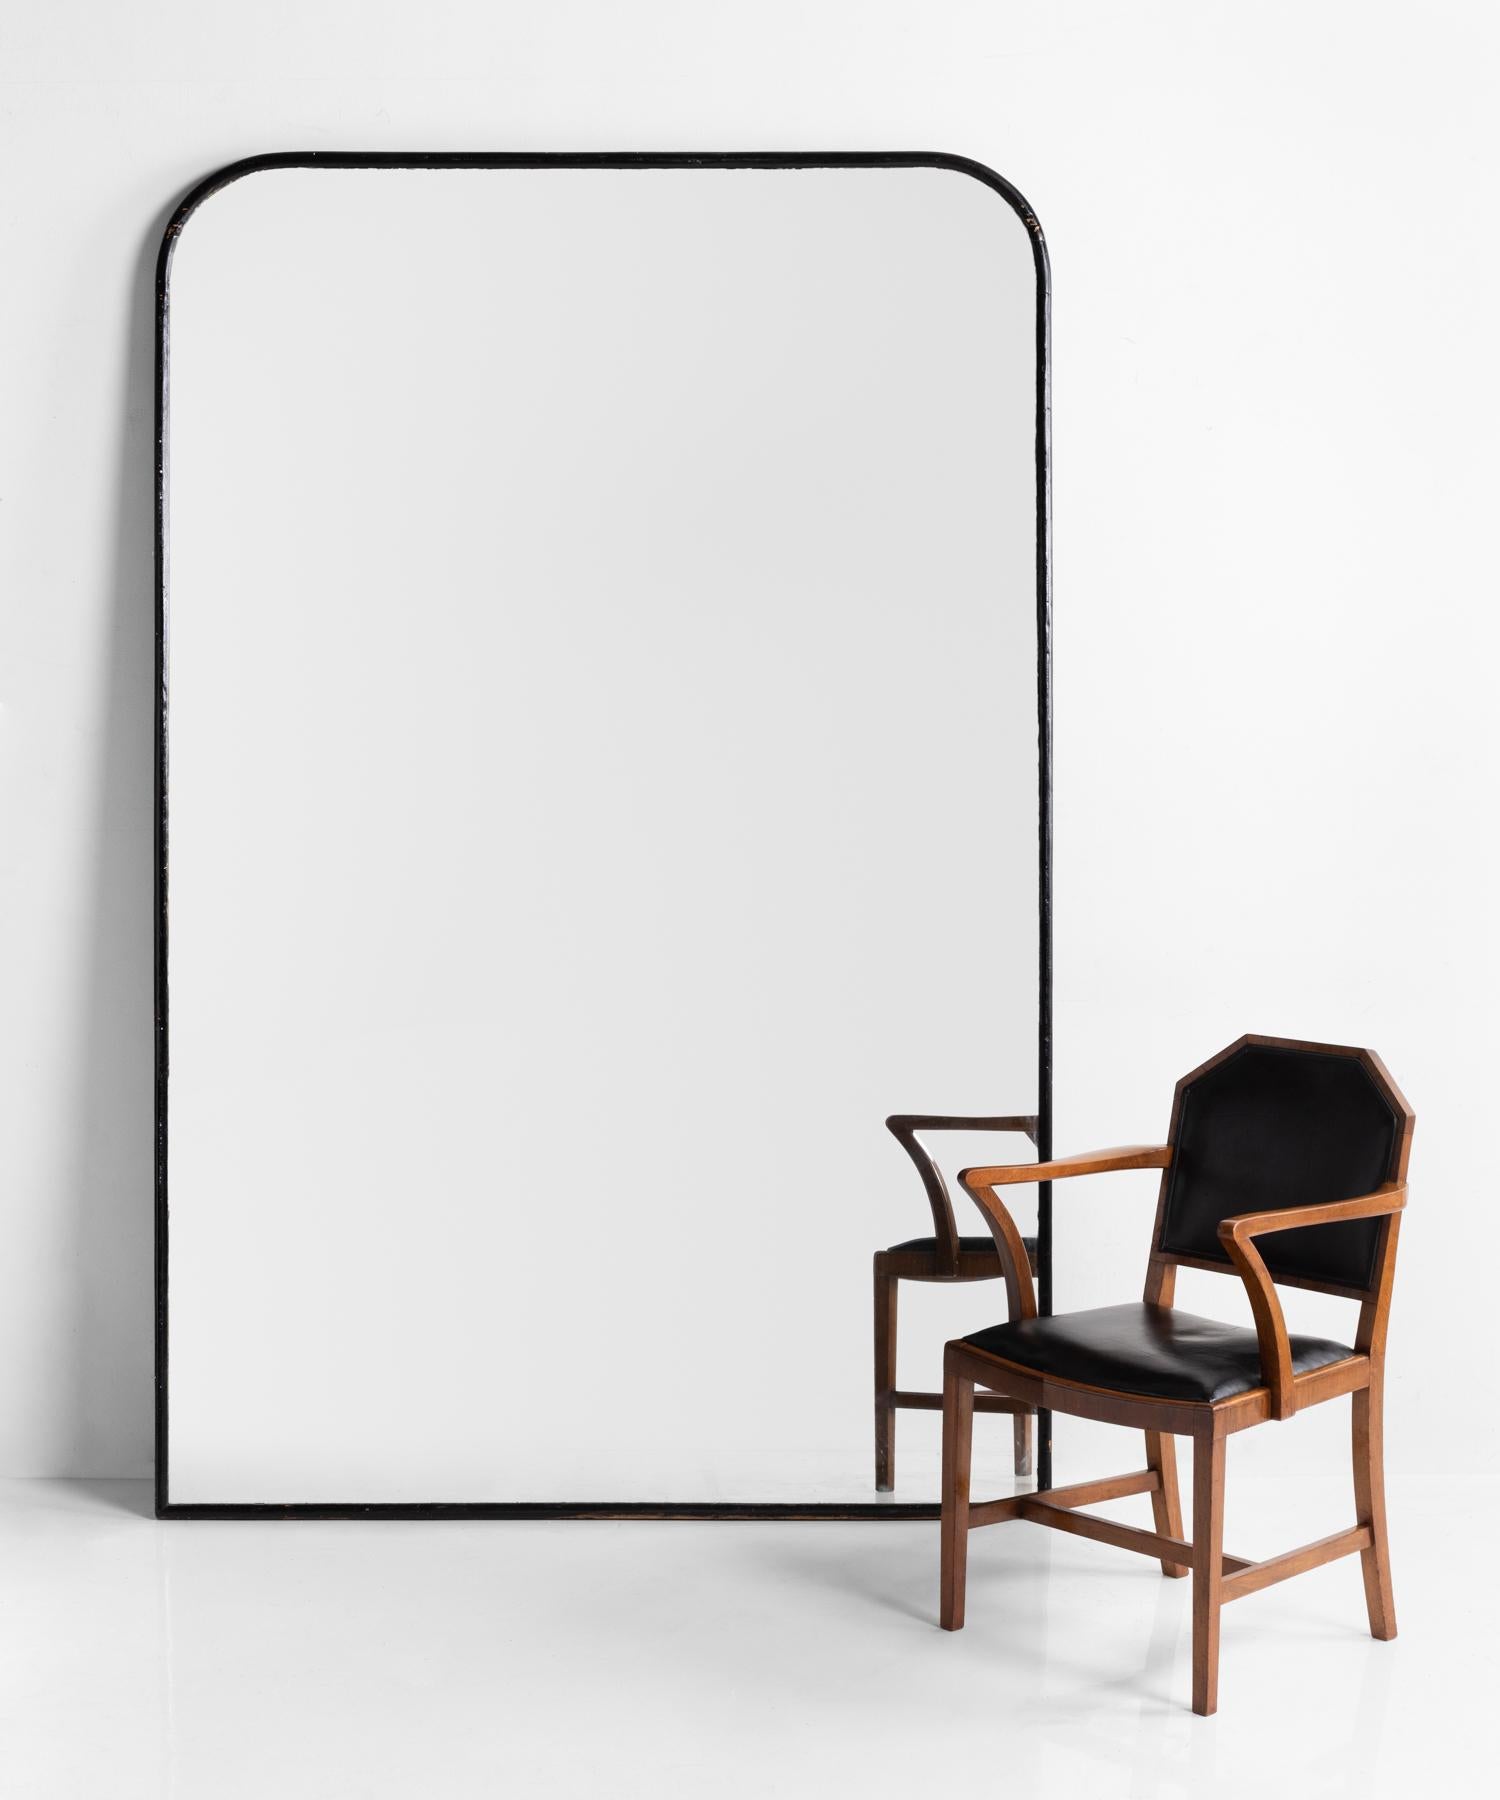 Massive Outfitters Mirror, England, 20th Century

With original back panel and smokey mirror glass..